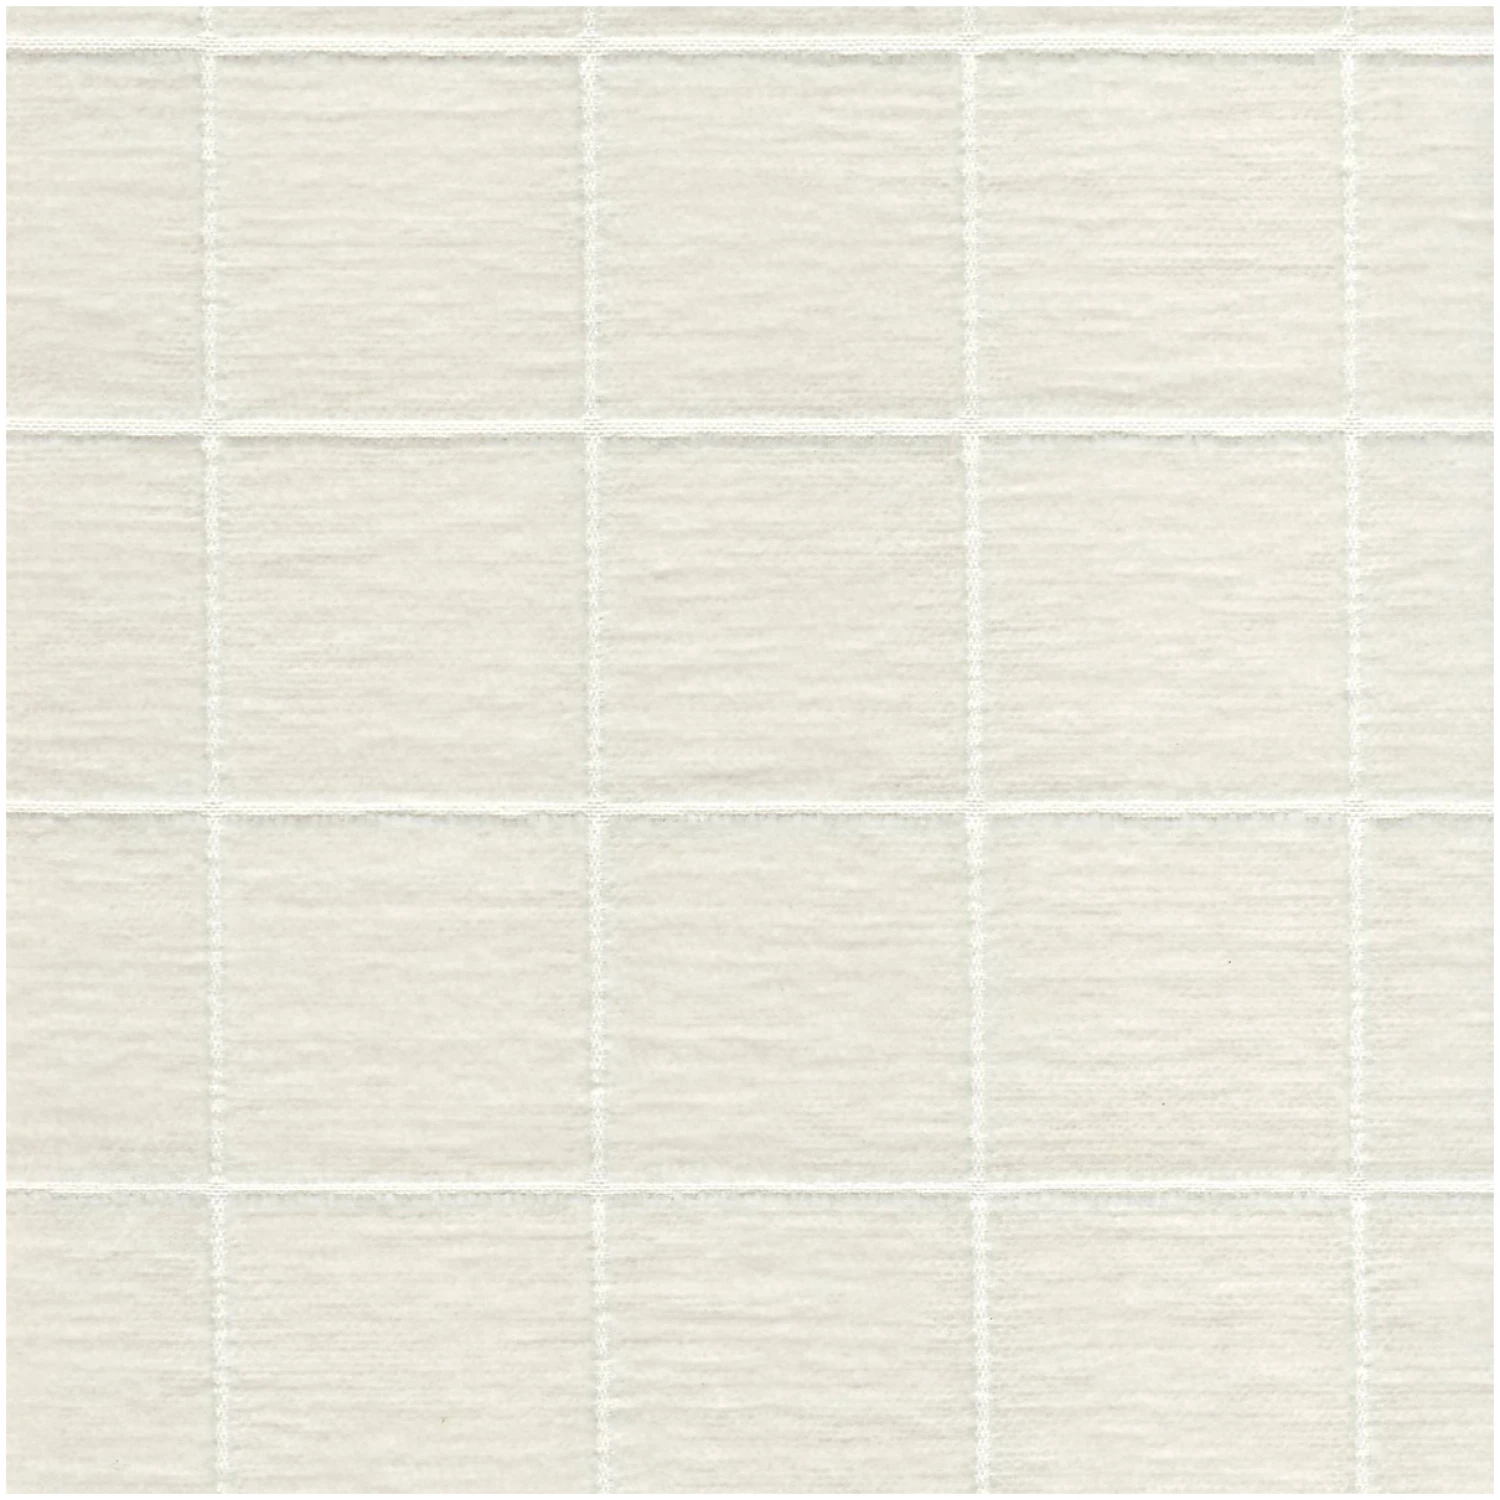 Vlock/Cream - Upholstery Only Fabric Suitable For Upholstery And Pillows Only.   - Houston